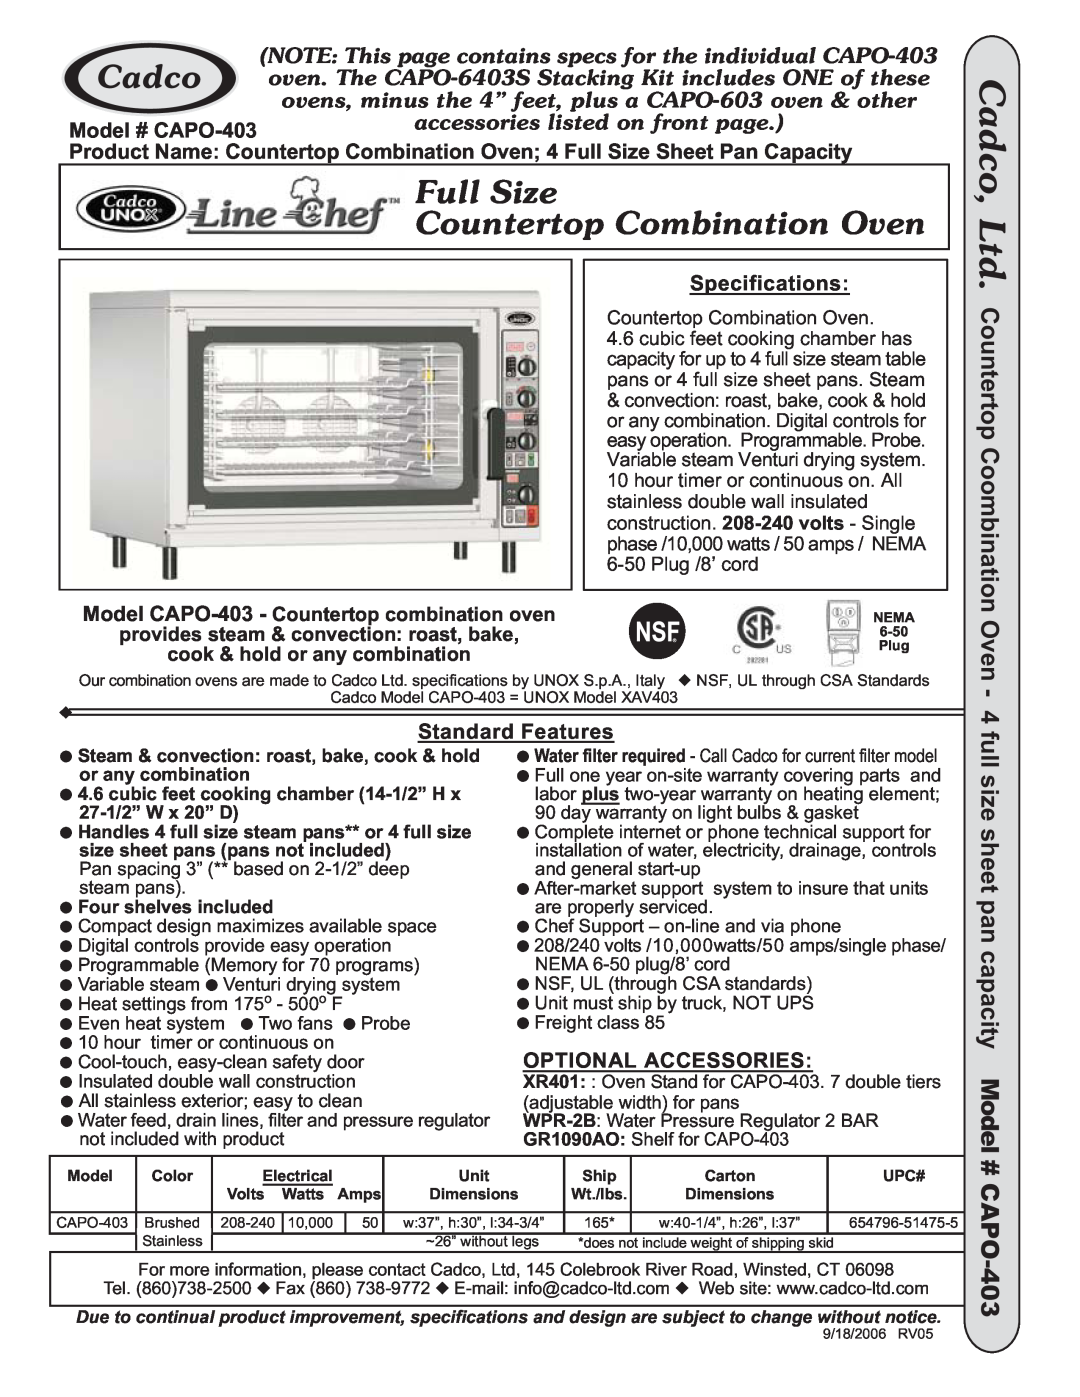 Cadco CAPO-6403S Countertop Coombination Oven, full size sheet pan capacity Model, # CAPO-403, Specifications 